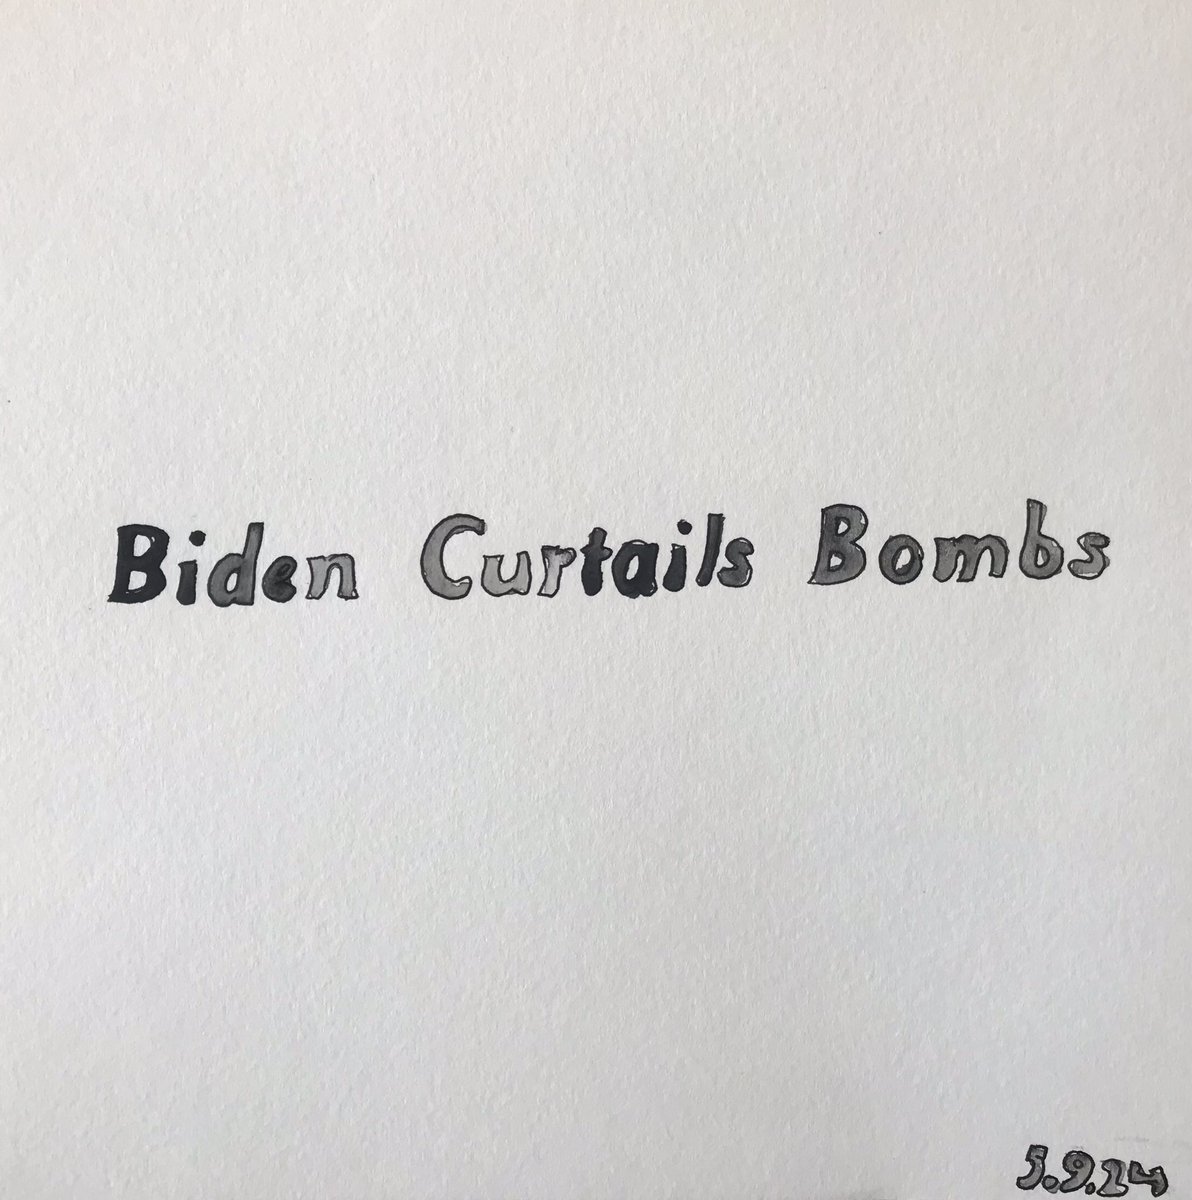 #BidenCurtailsBombs #NYT #May9_24 . #US tests ties with #Israel - #Biden curtails Bombs Despite Ironclad Bond @peterbakernyt nytimes.com/2024/05/08/us/…